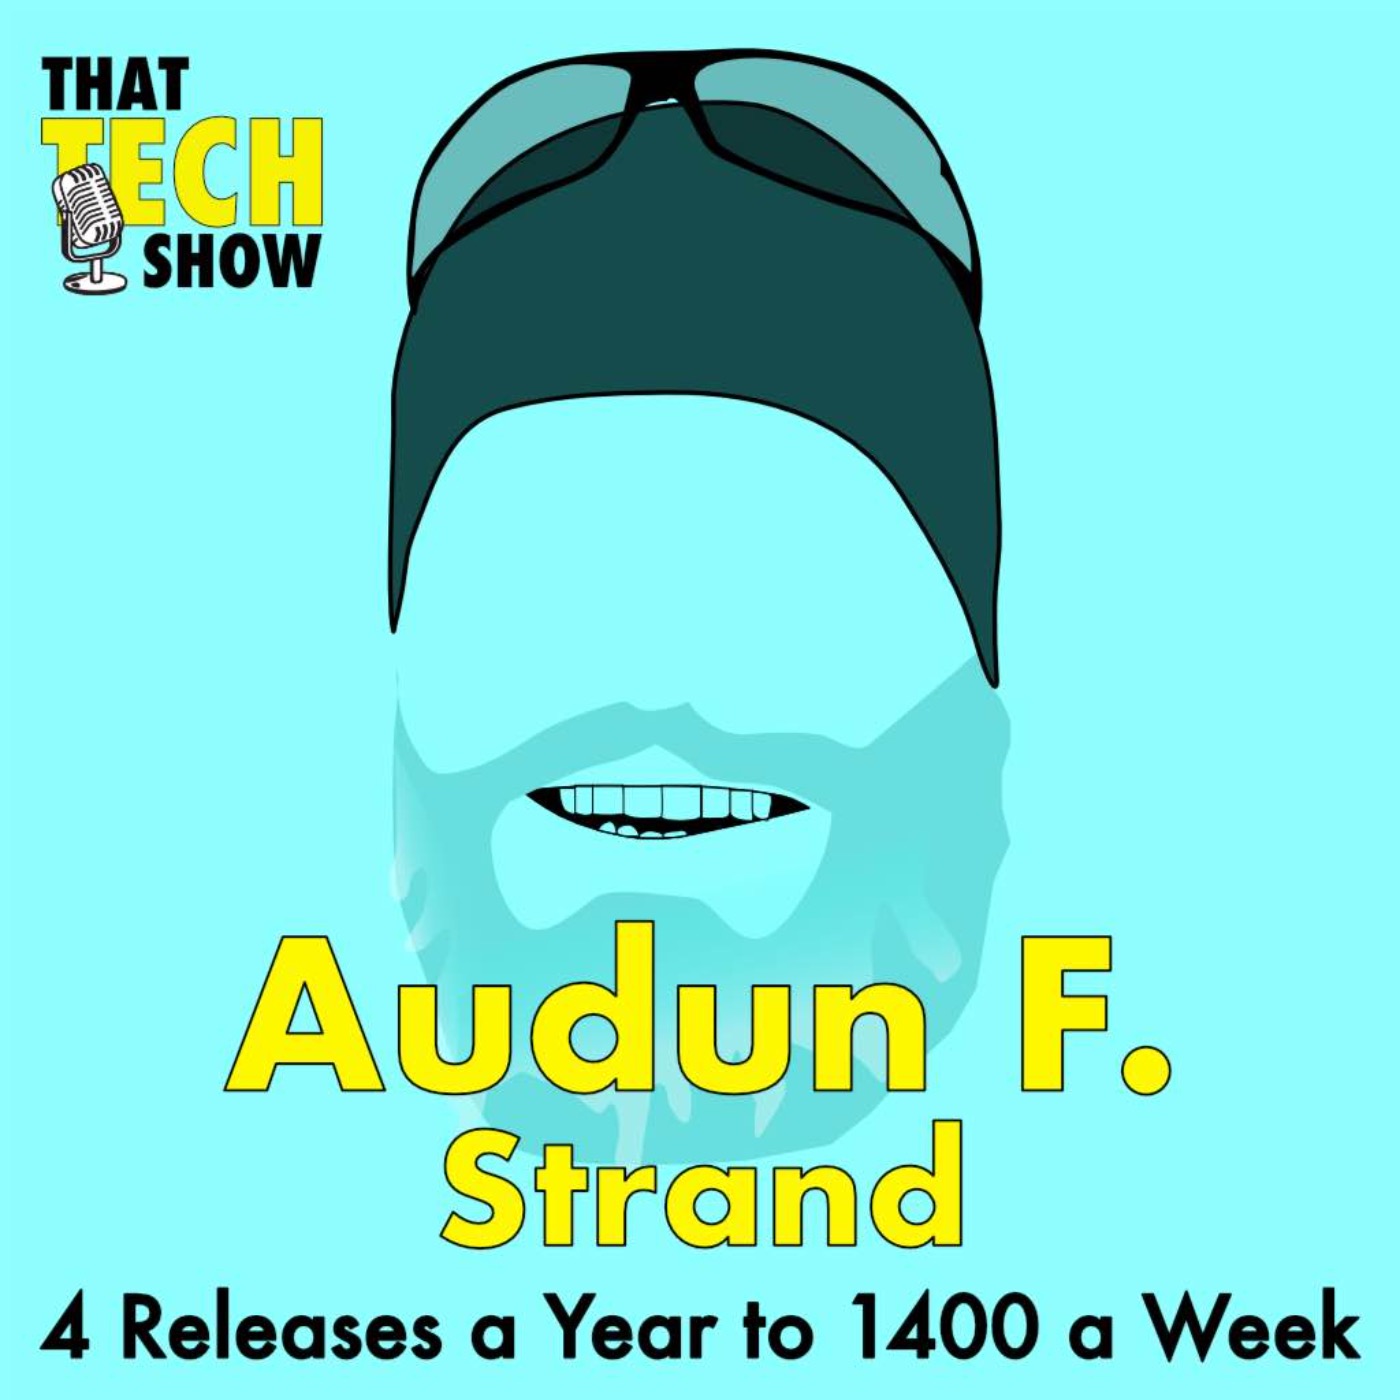 Episode 17 - 4 Releases a Year to 1400 a Week with Audun F Strand